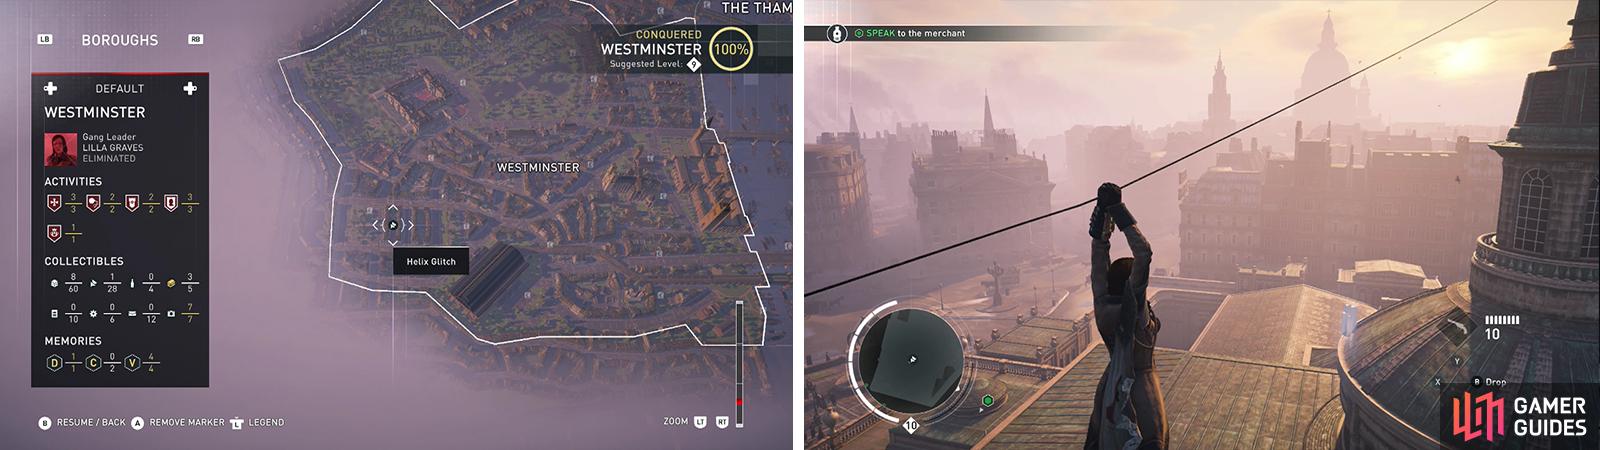 The Helix Glitch icon on the world map (left) and what they look like in-game (right).